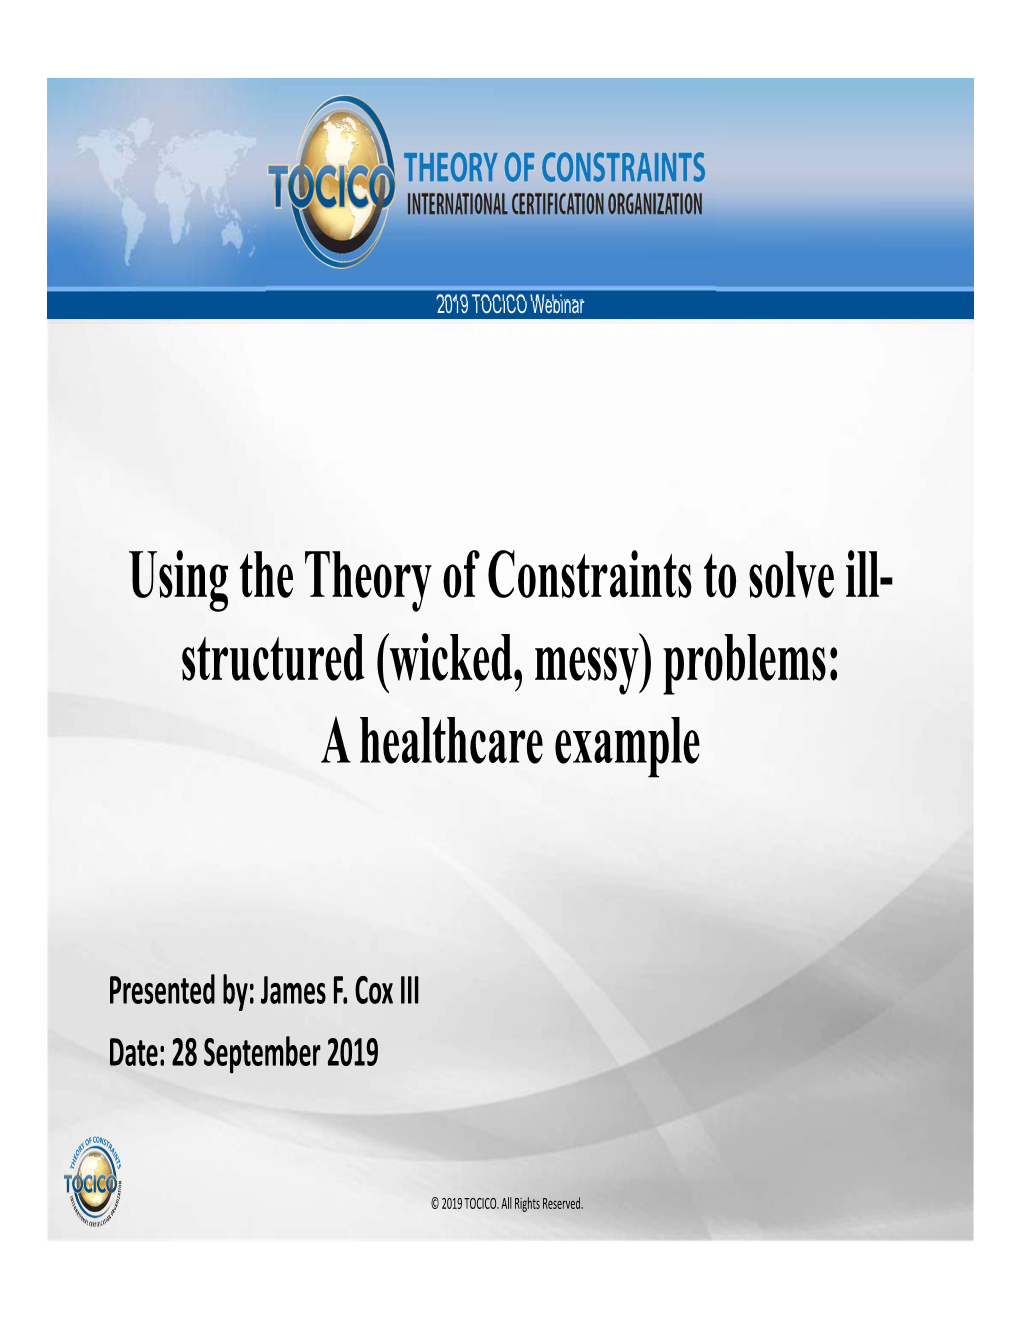 Using the Theory of Constraints to Solve Ill- Structured (Wicked, Messy) Problems: a Healthcare Example